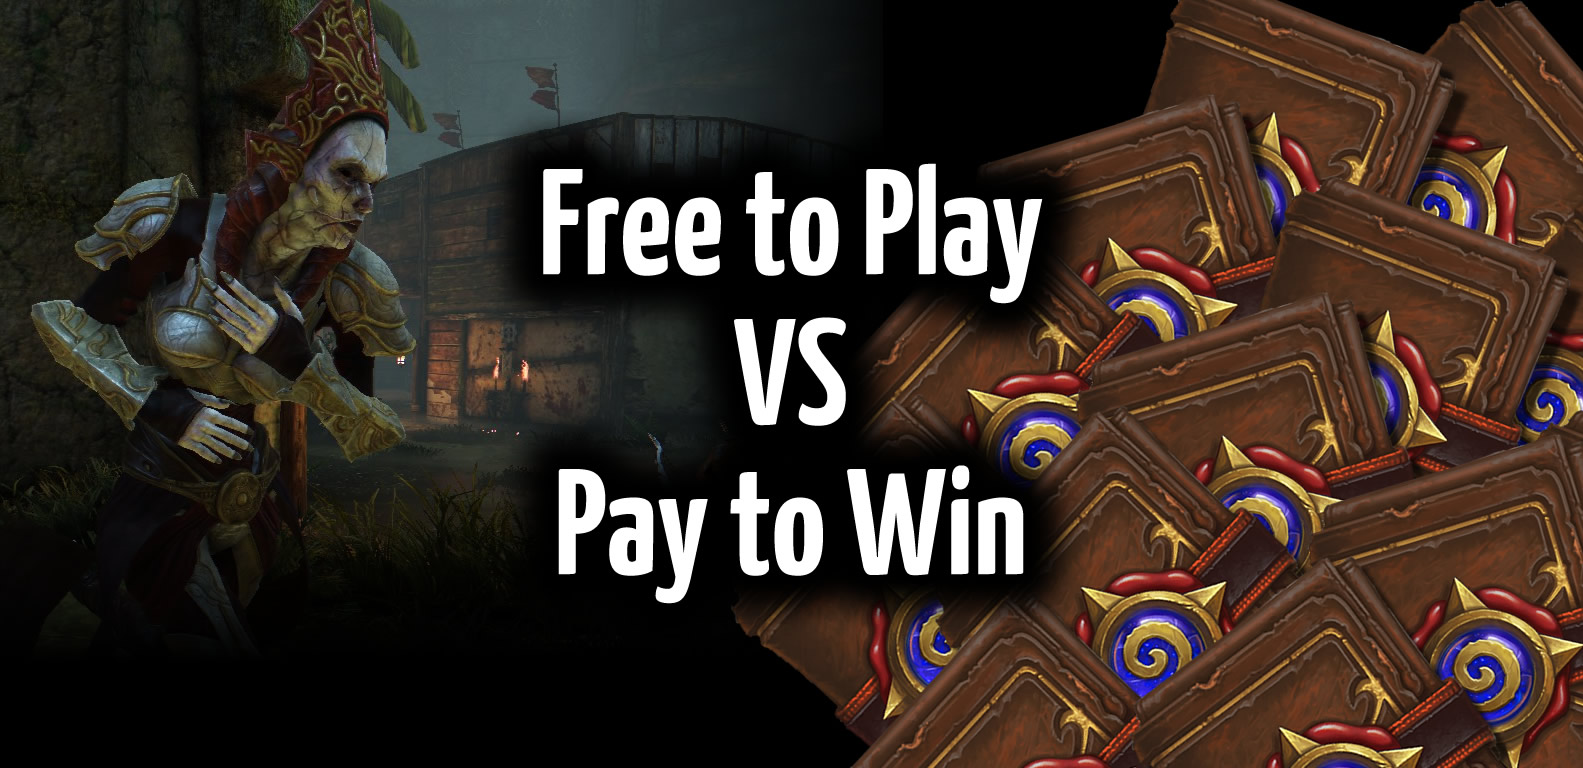 Free to Play VS Pay to Win